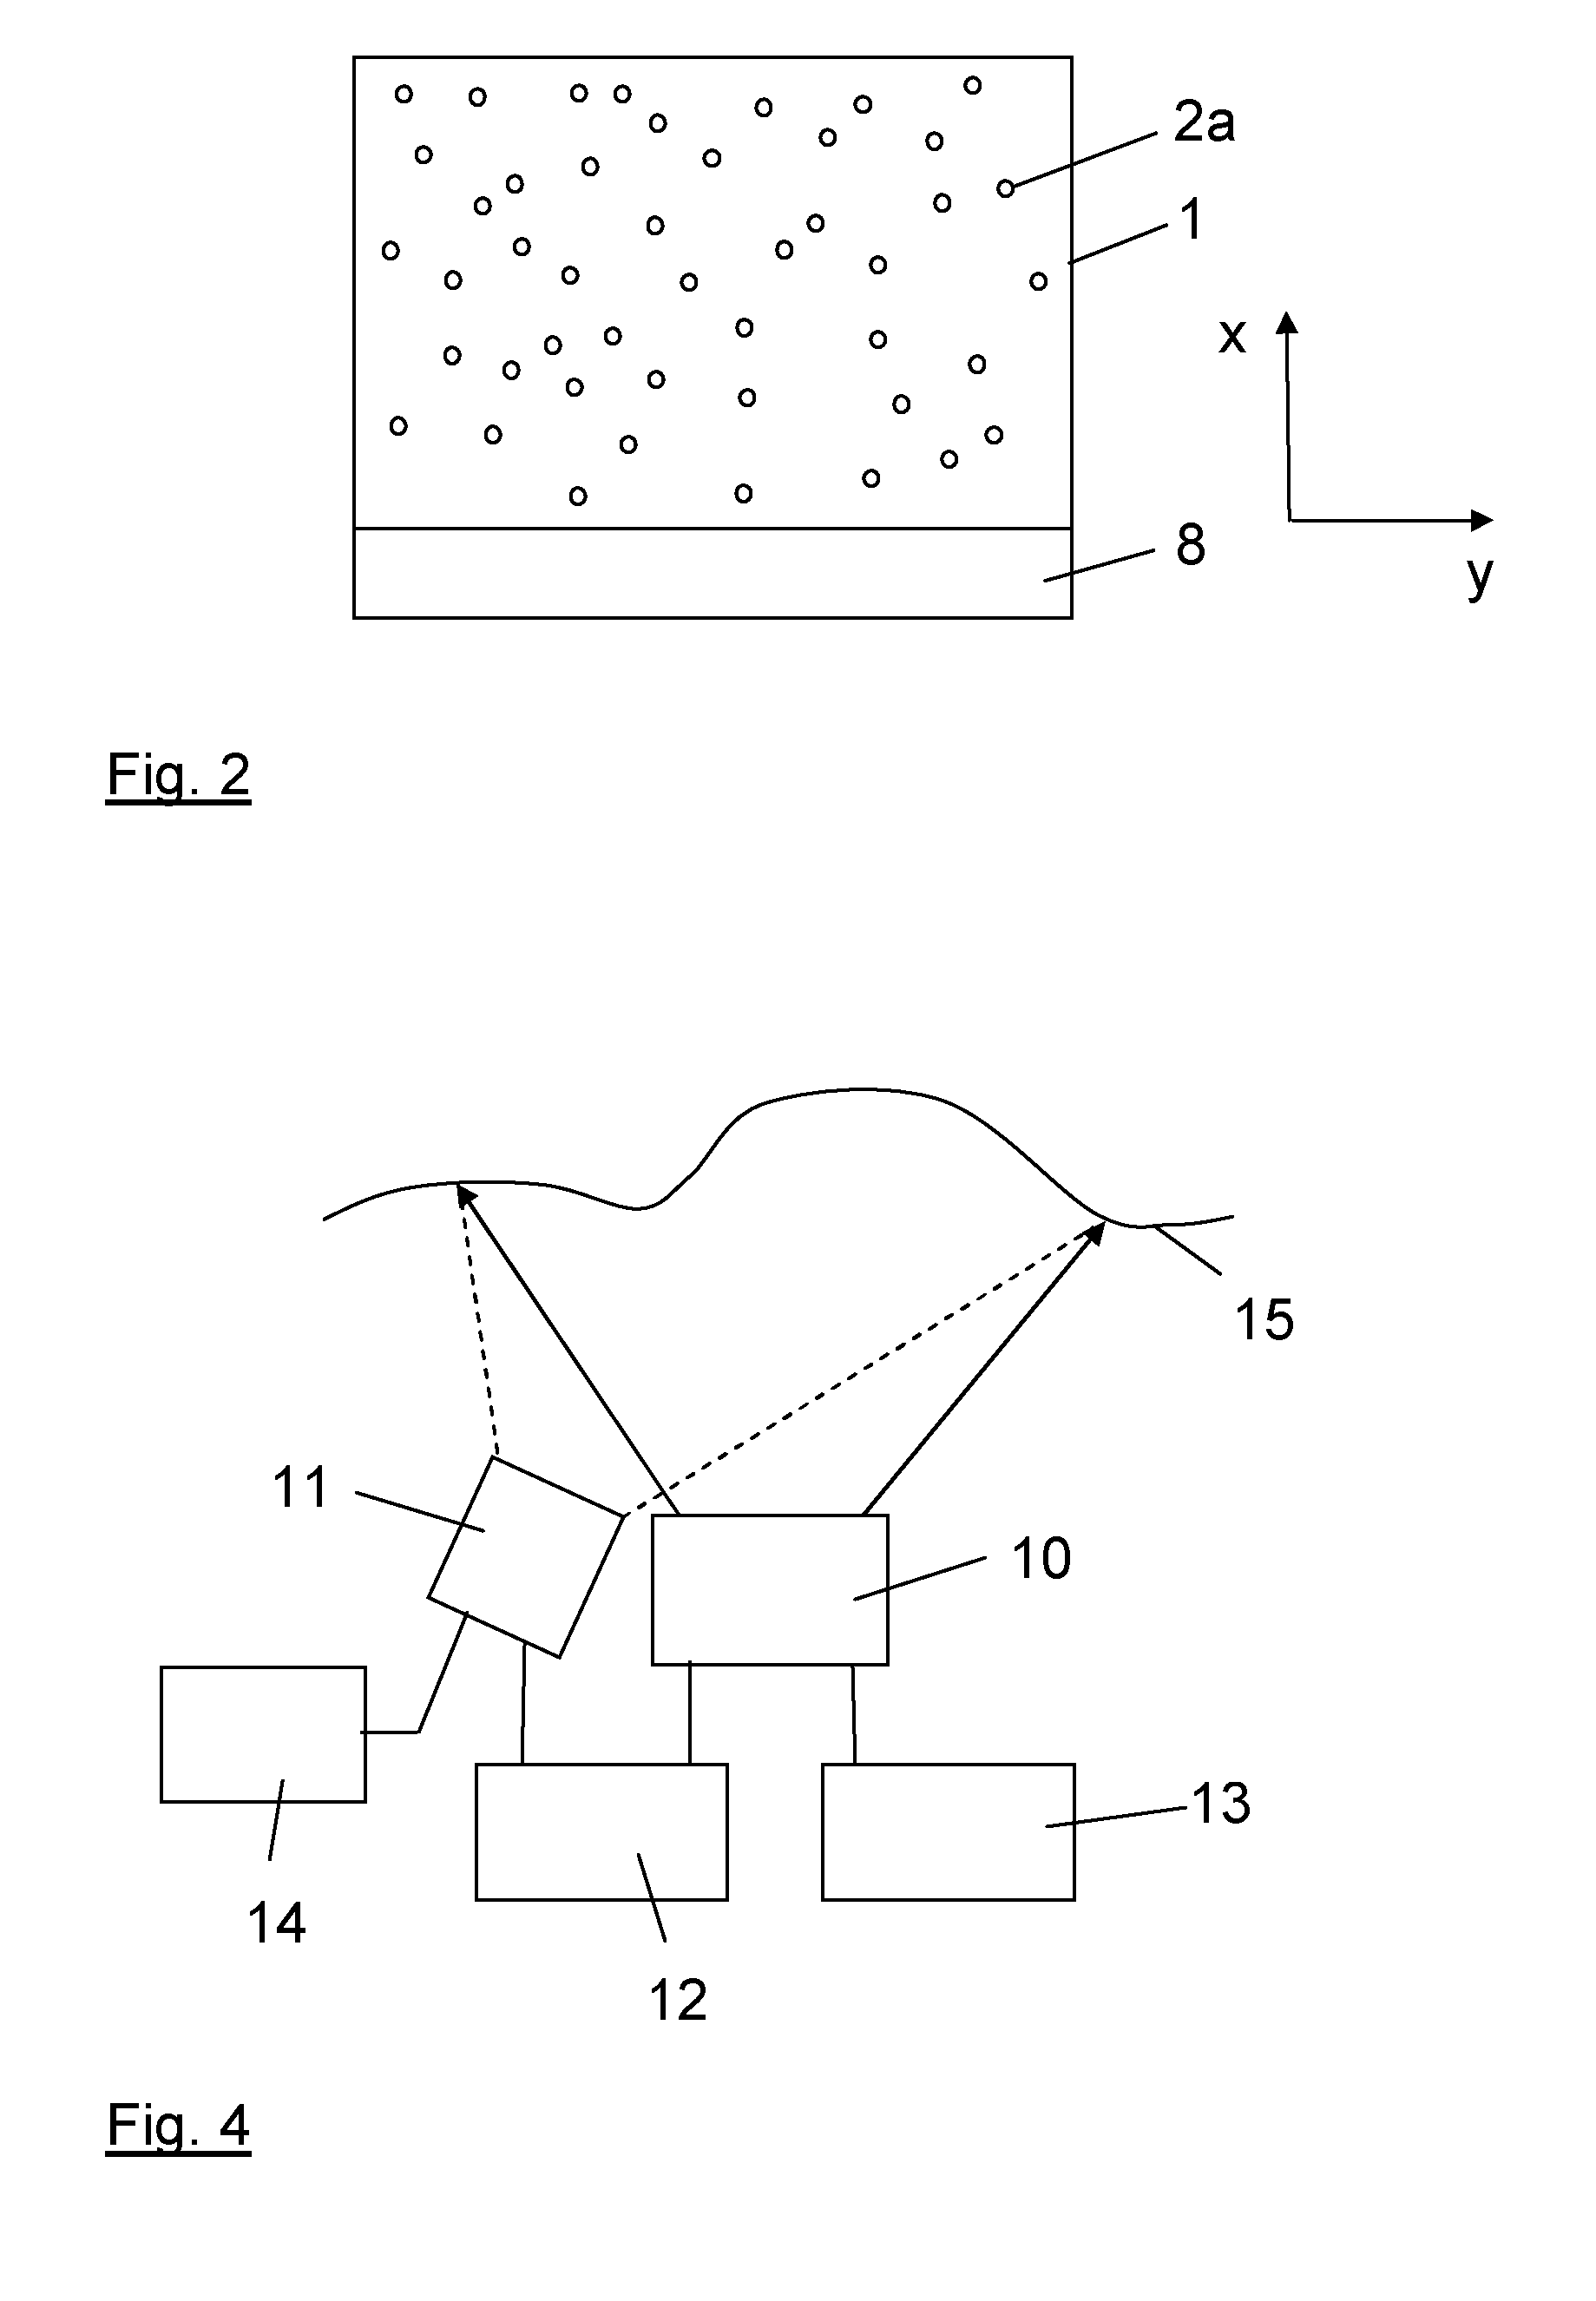 Laser device for projecting a structured light pattern onto a scene